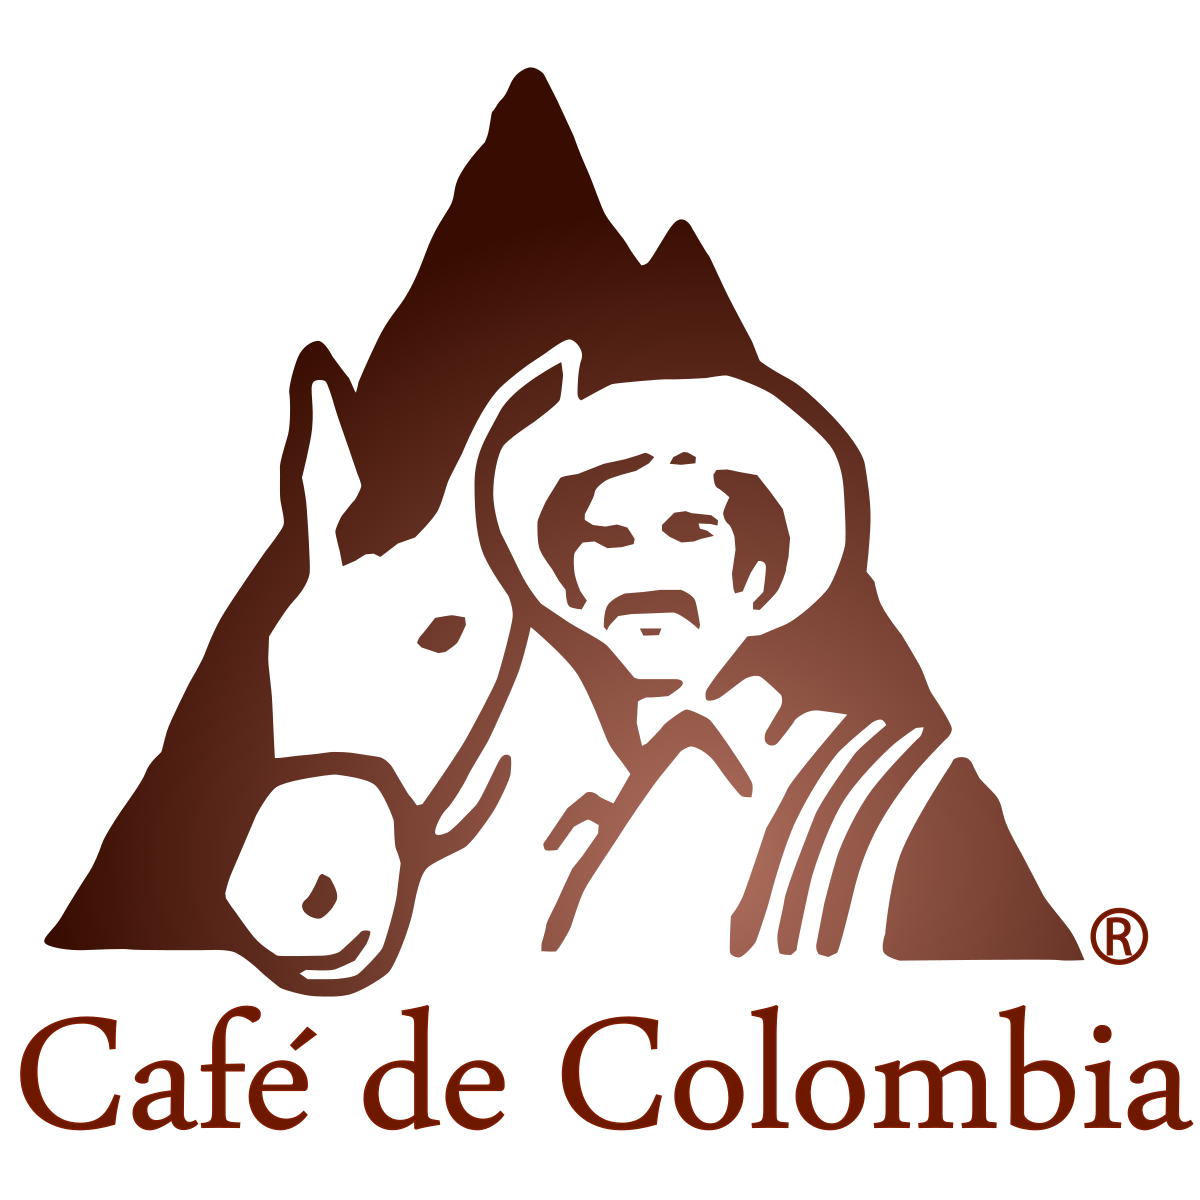 Juan Valdez - The face of Colombian coffee and the standard logo